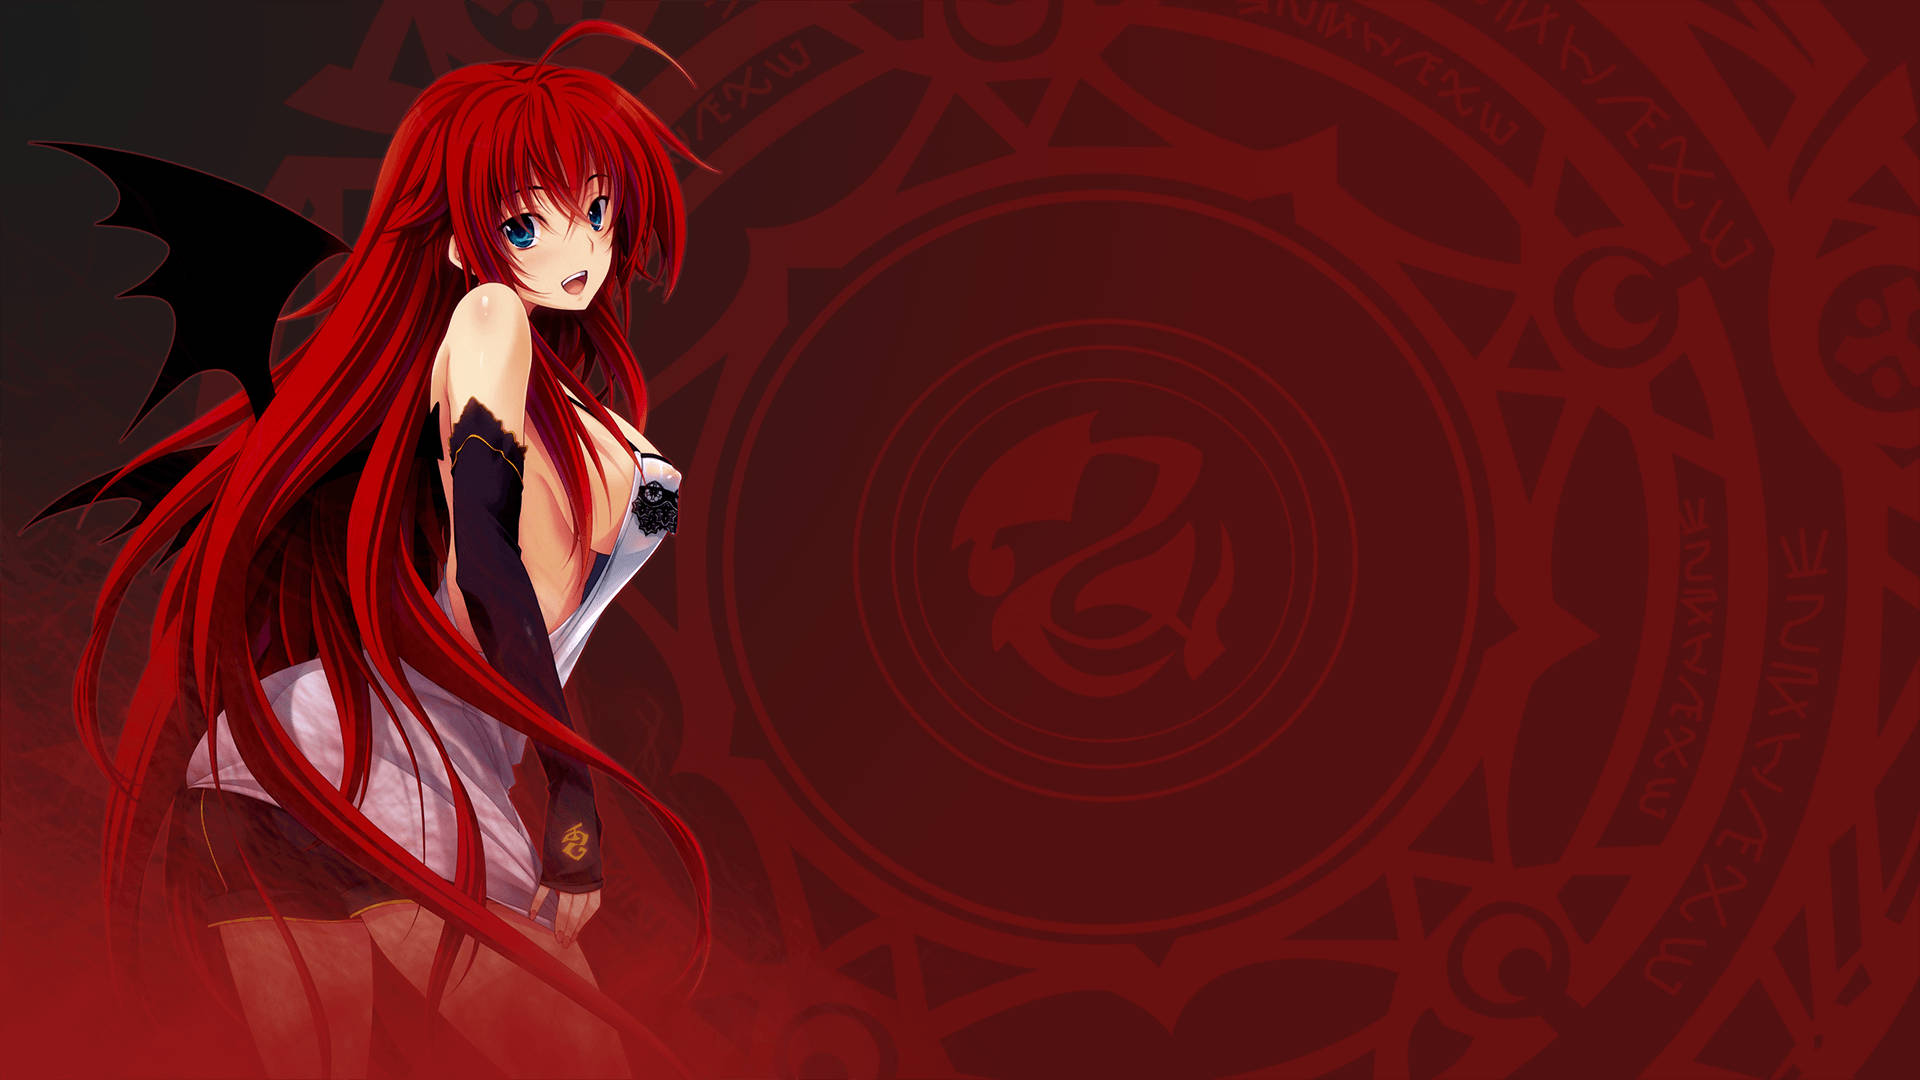 The Gremory Clan, Featuring Rias Gremory, in Highschool DxD Wallpaper